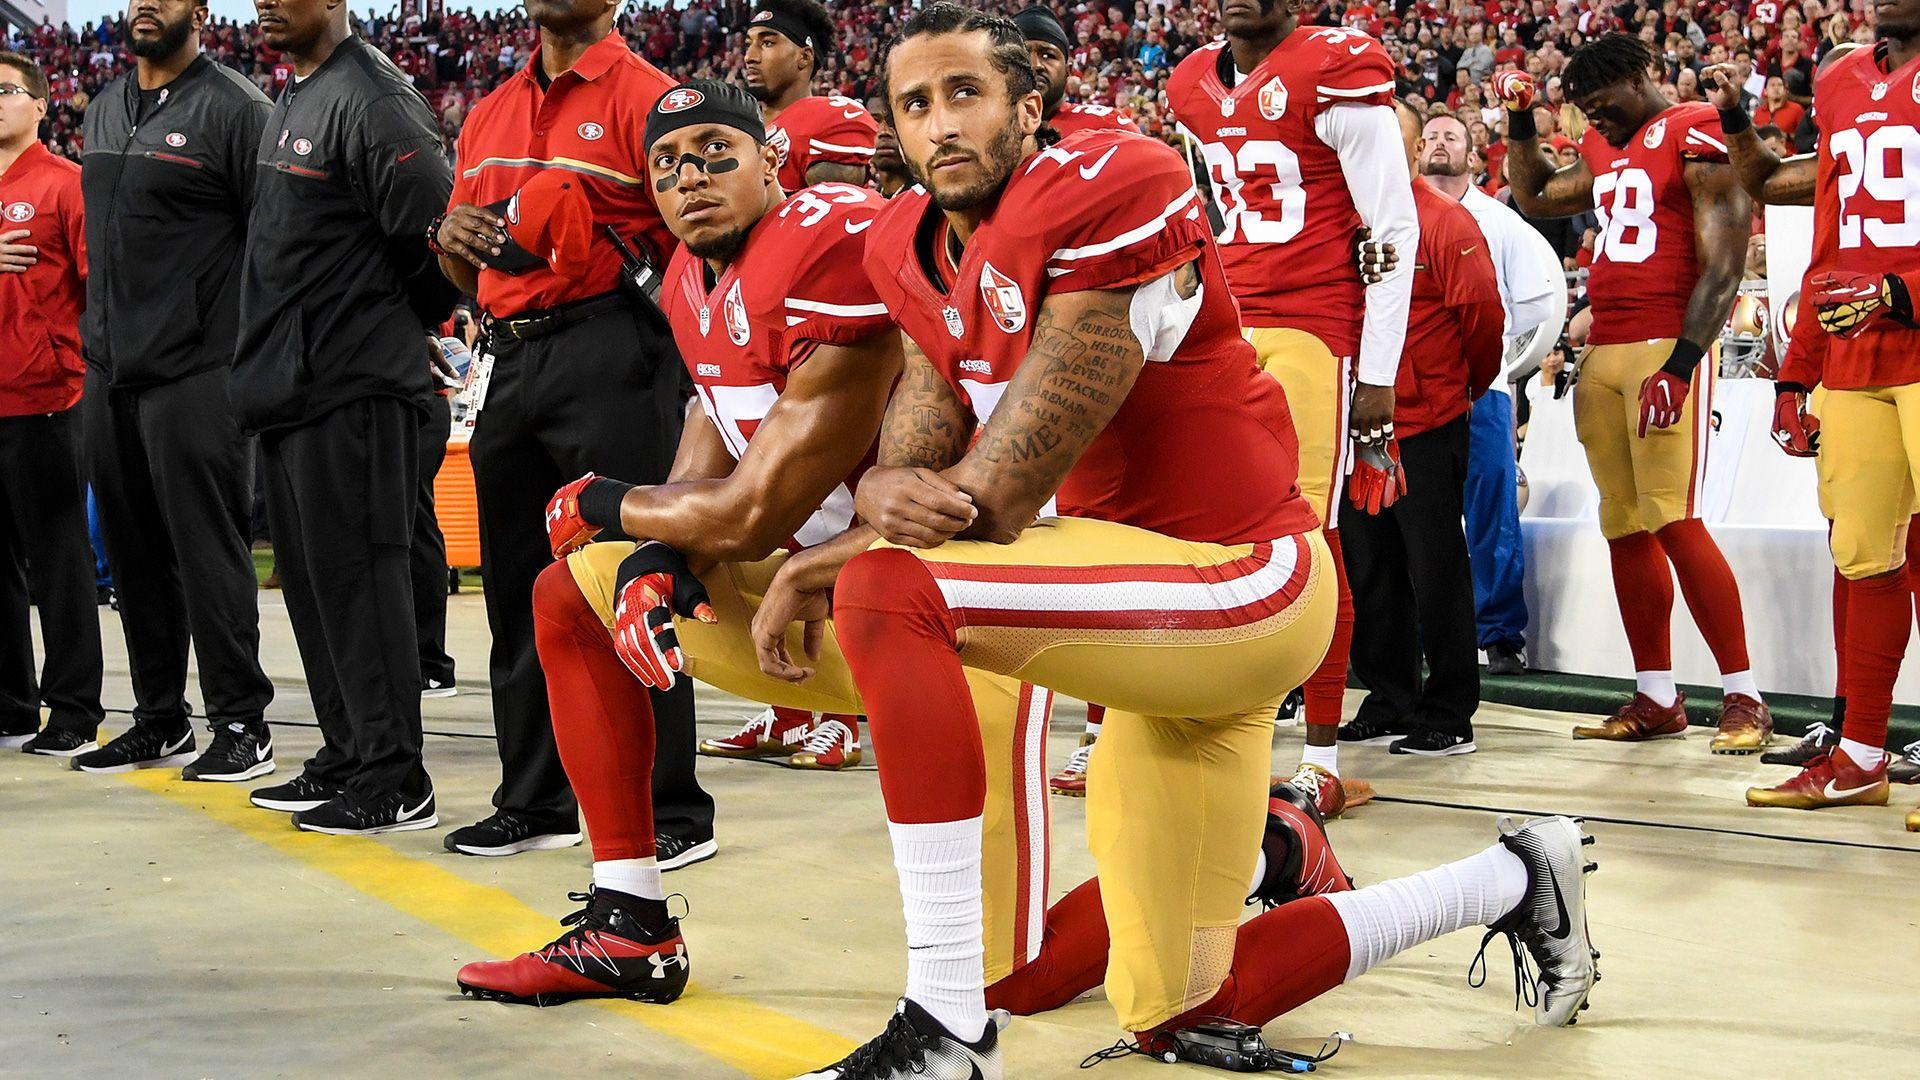 Kaepernick Effect? Falling ratings force NFL TV networks to give